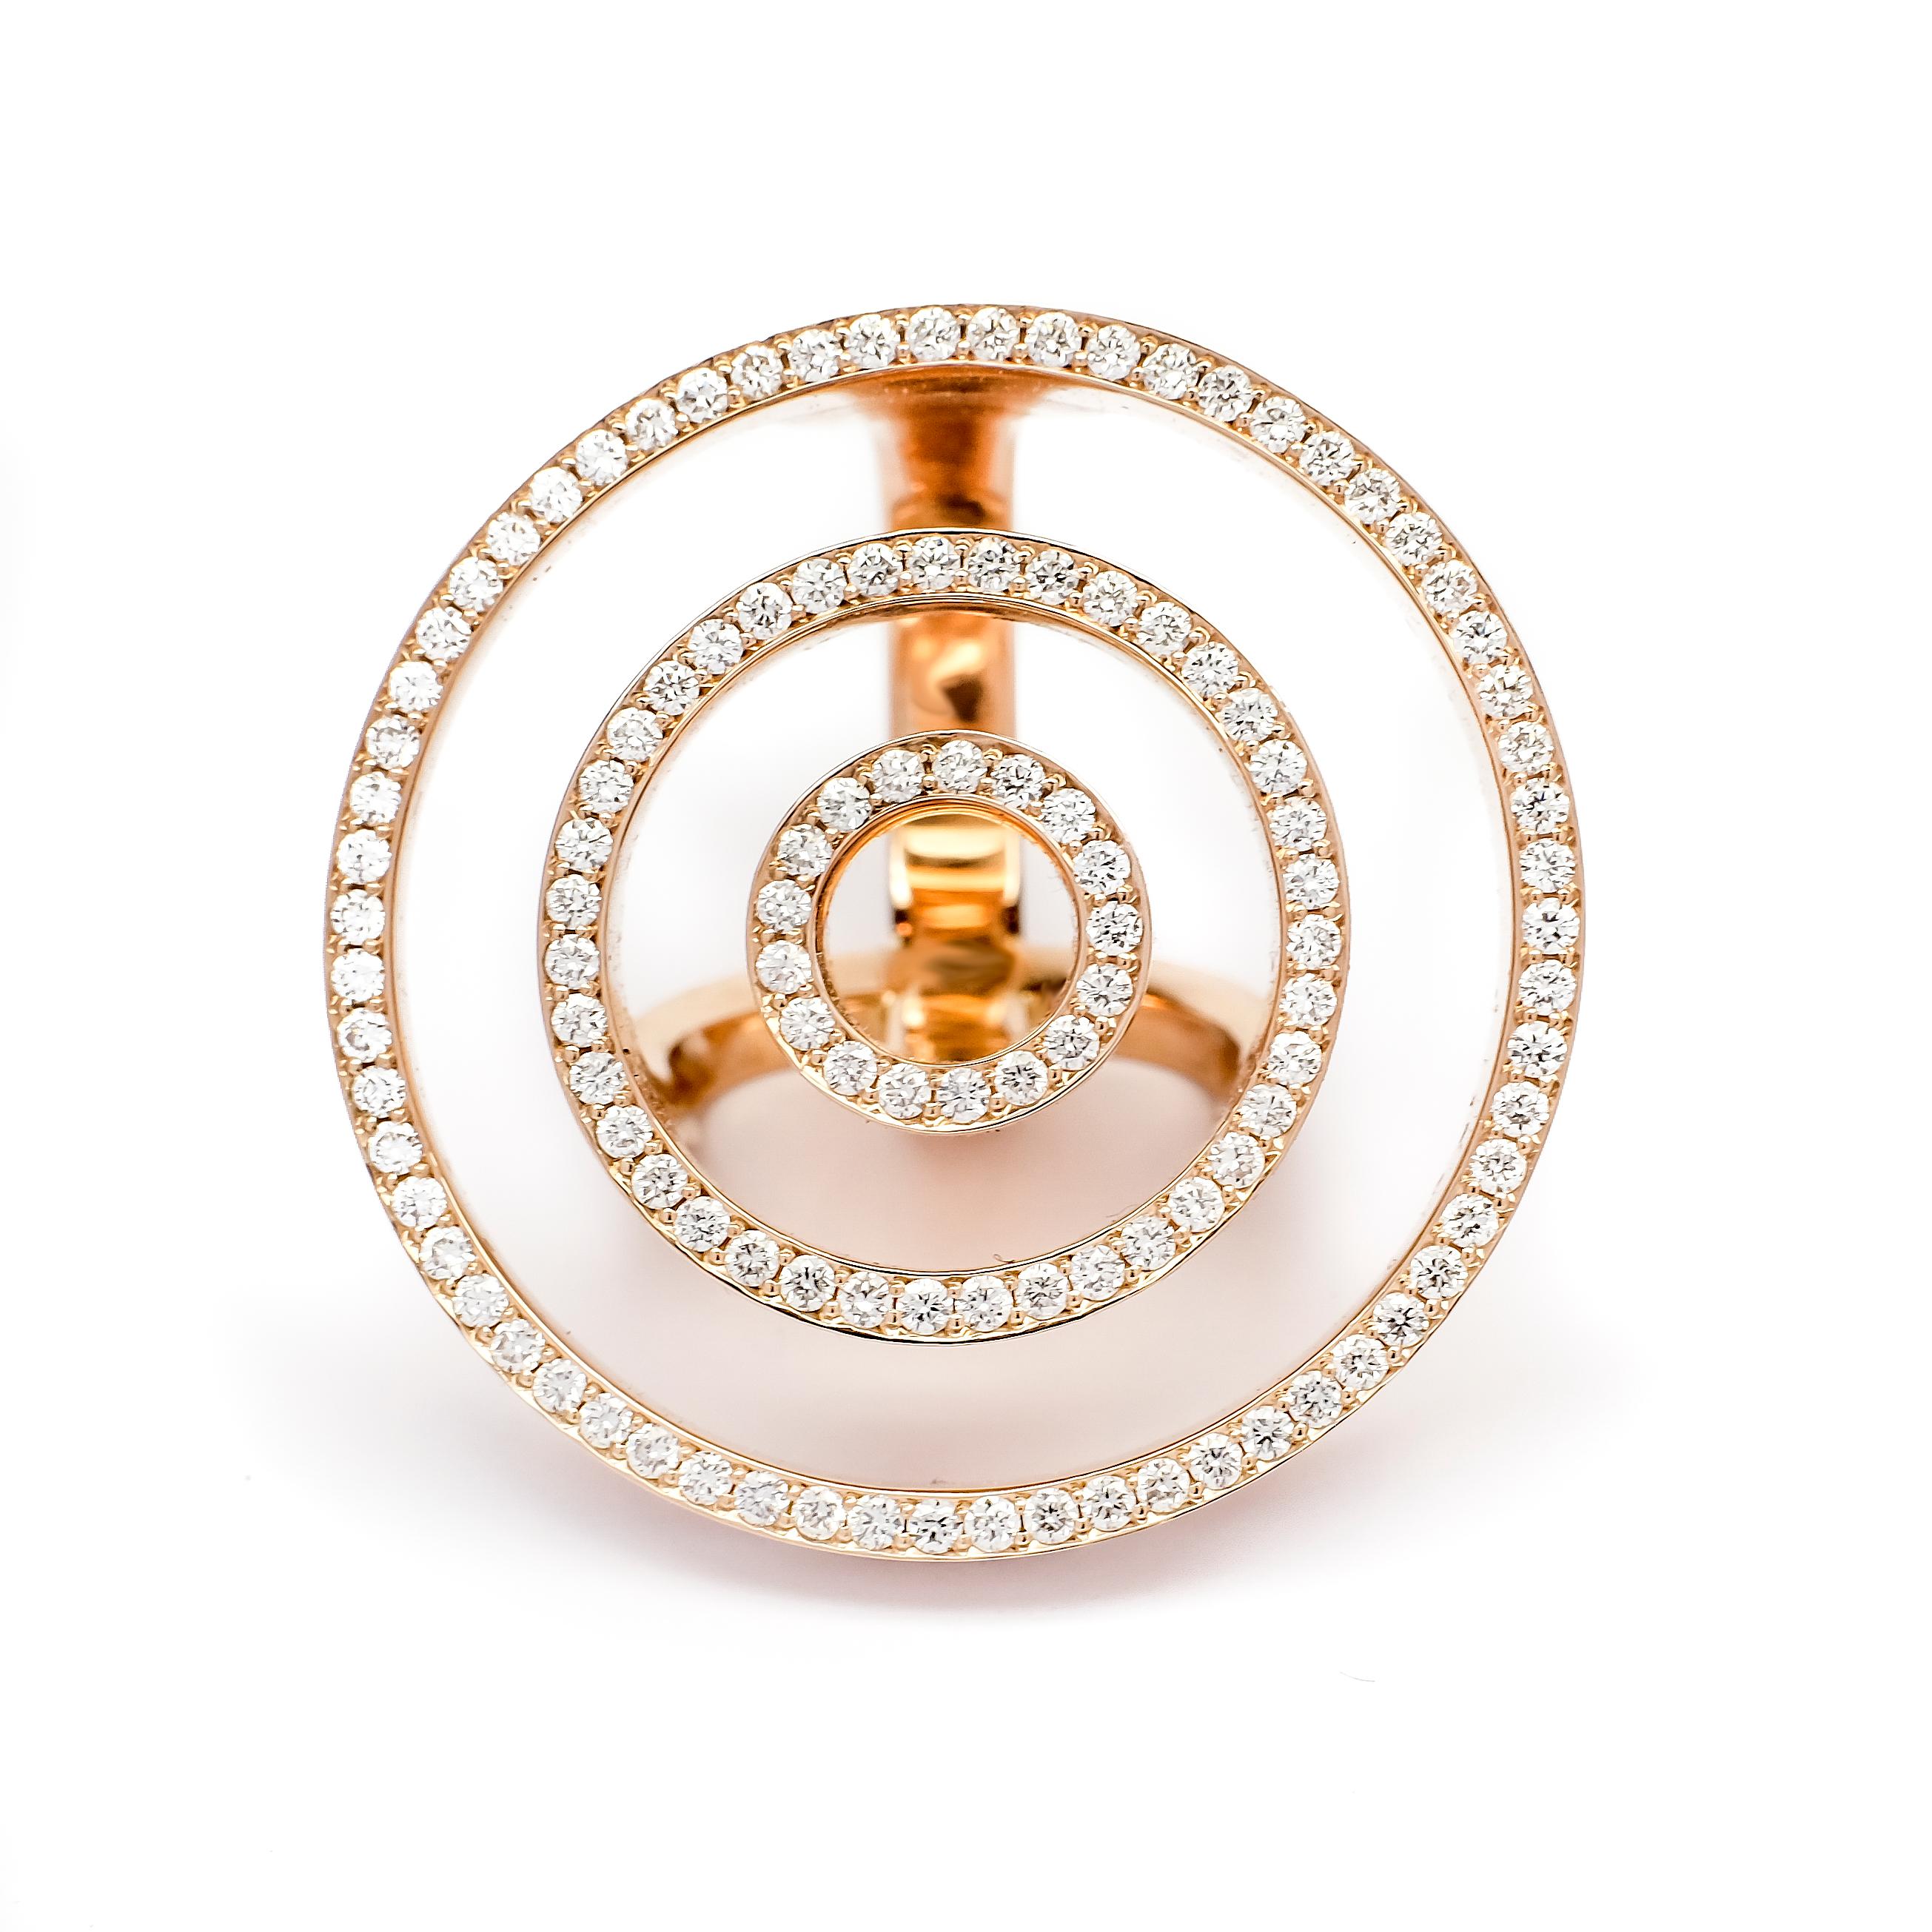 Crafted out of 14 karat rose gold this ring has a total of 0.88ct of top white vvs diamonds.
With this contemporary design Frohmann seeks to bring out the magic of jewelry by giving the illusion that the 3 circles are floating over the finger with